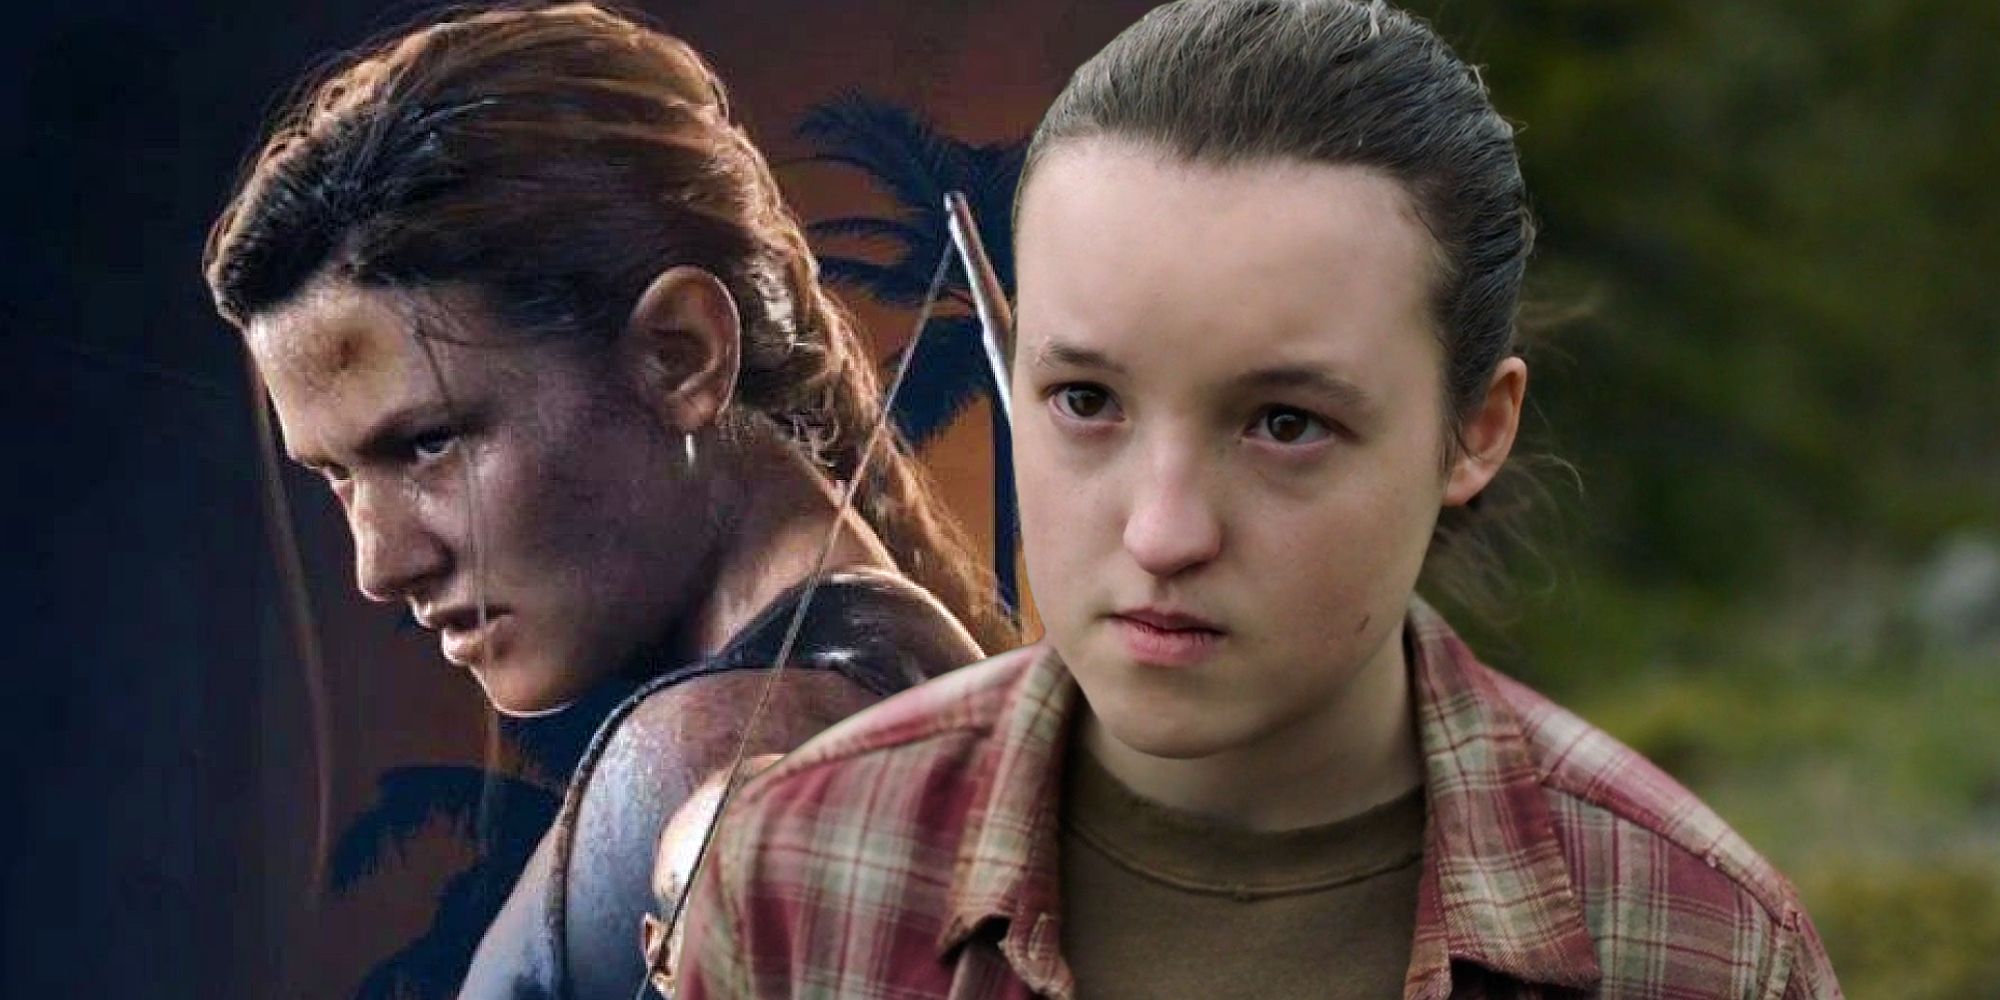 It's official. #TheLastofUsHBO Casts Abby. Who do you think got the role of  Abby in The Last of Us Season 2?